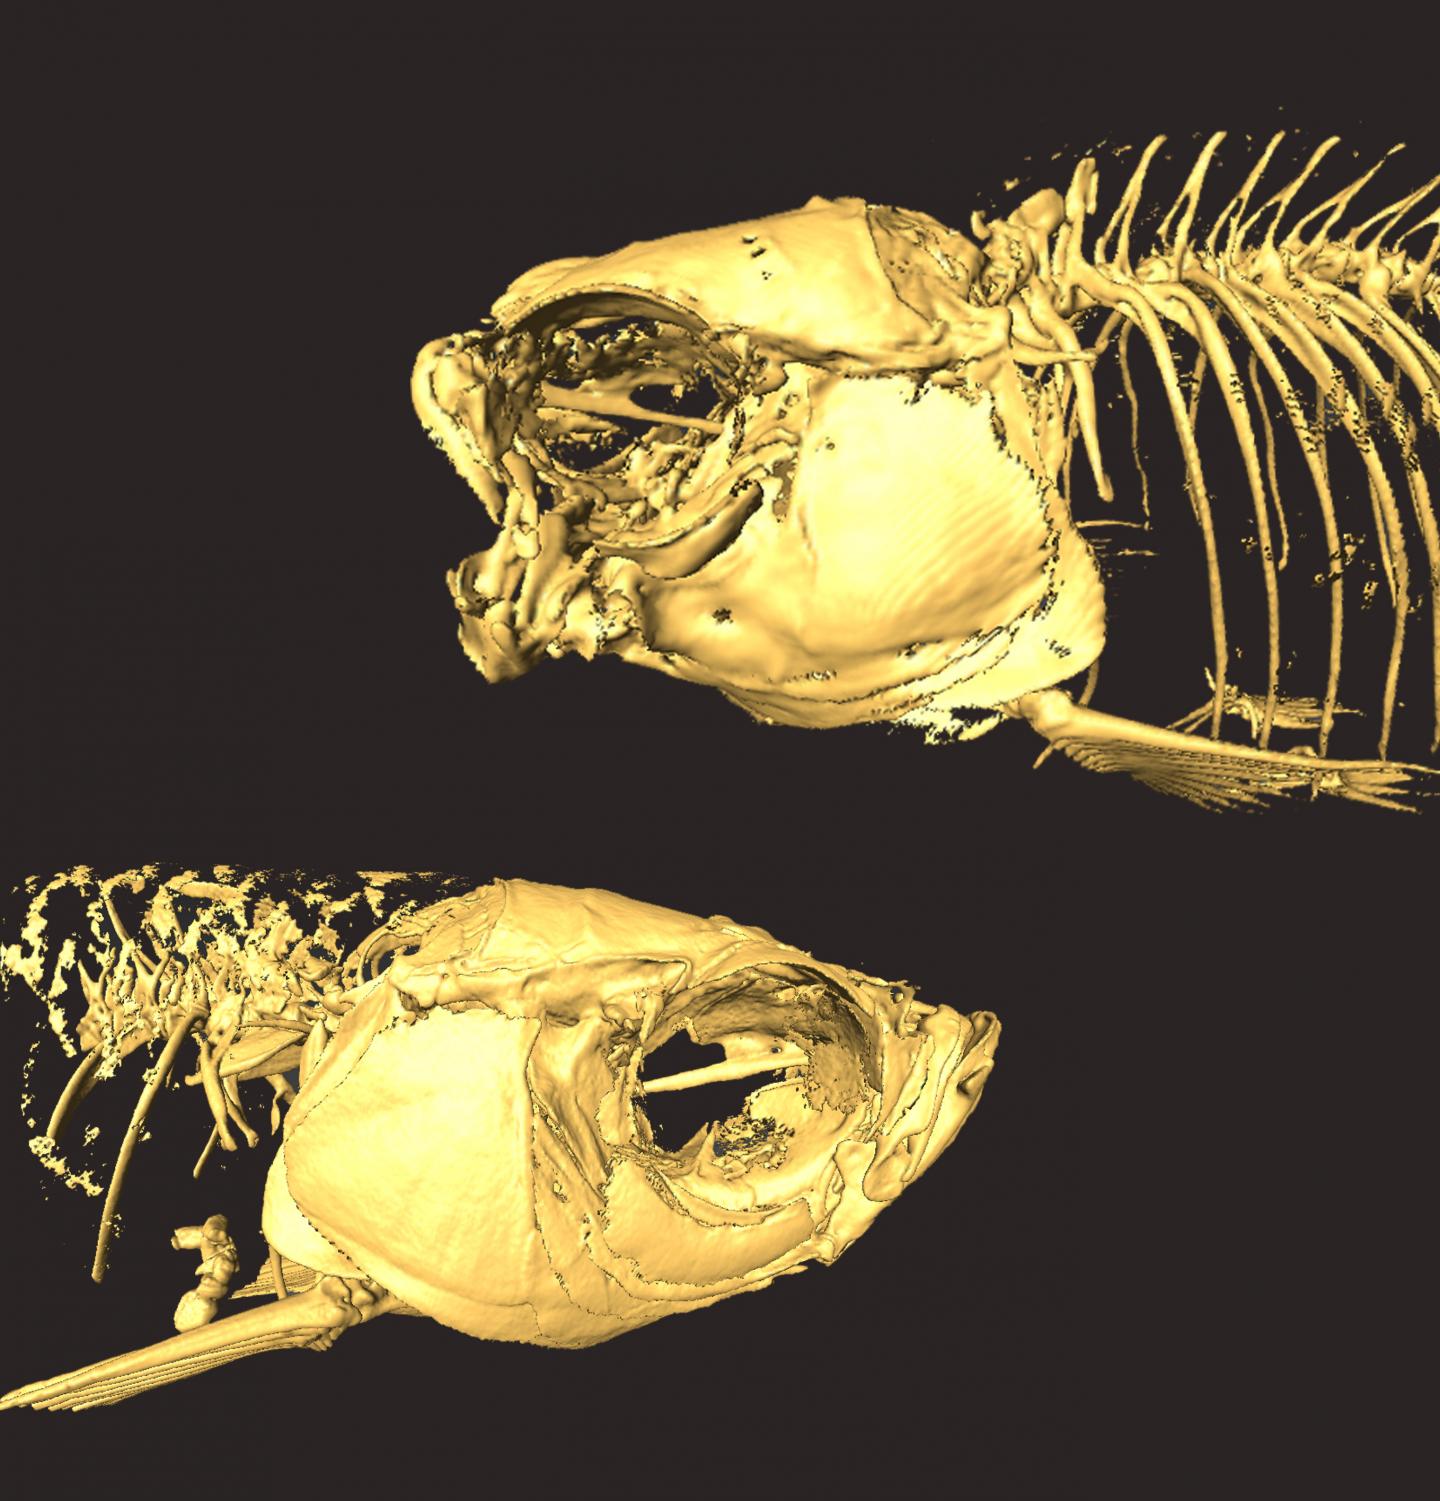 CT scan of normal and mutant zebrafish